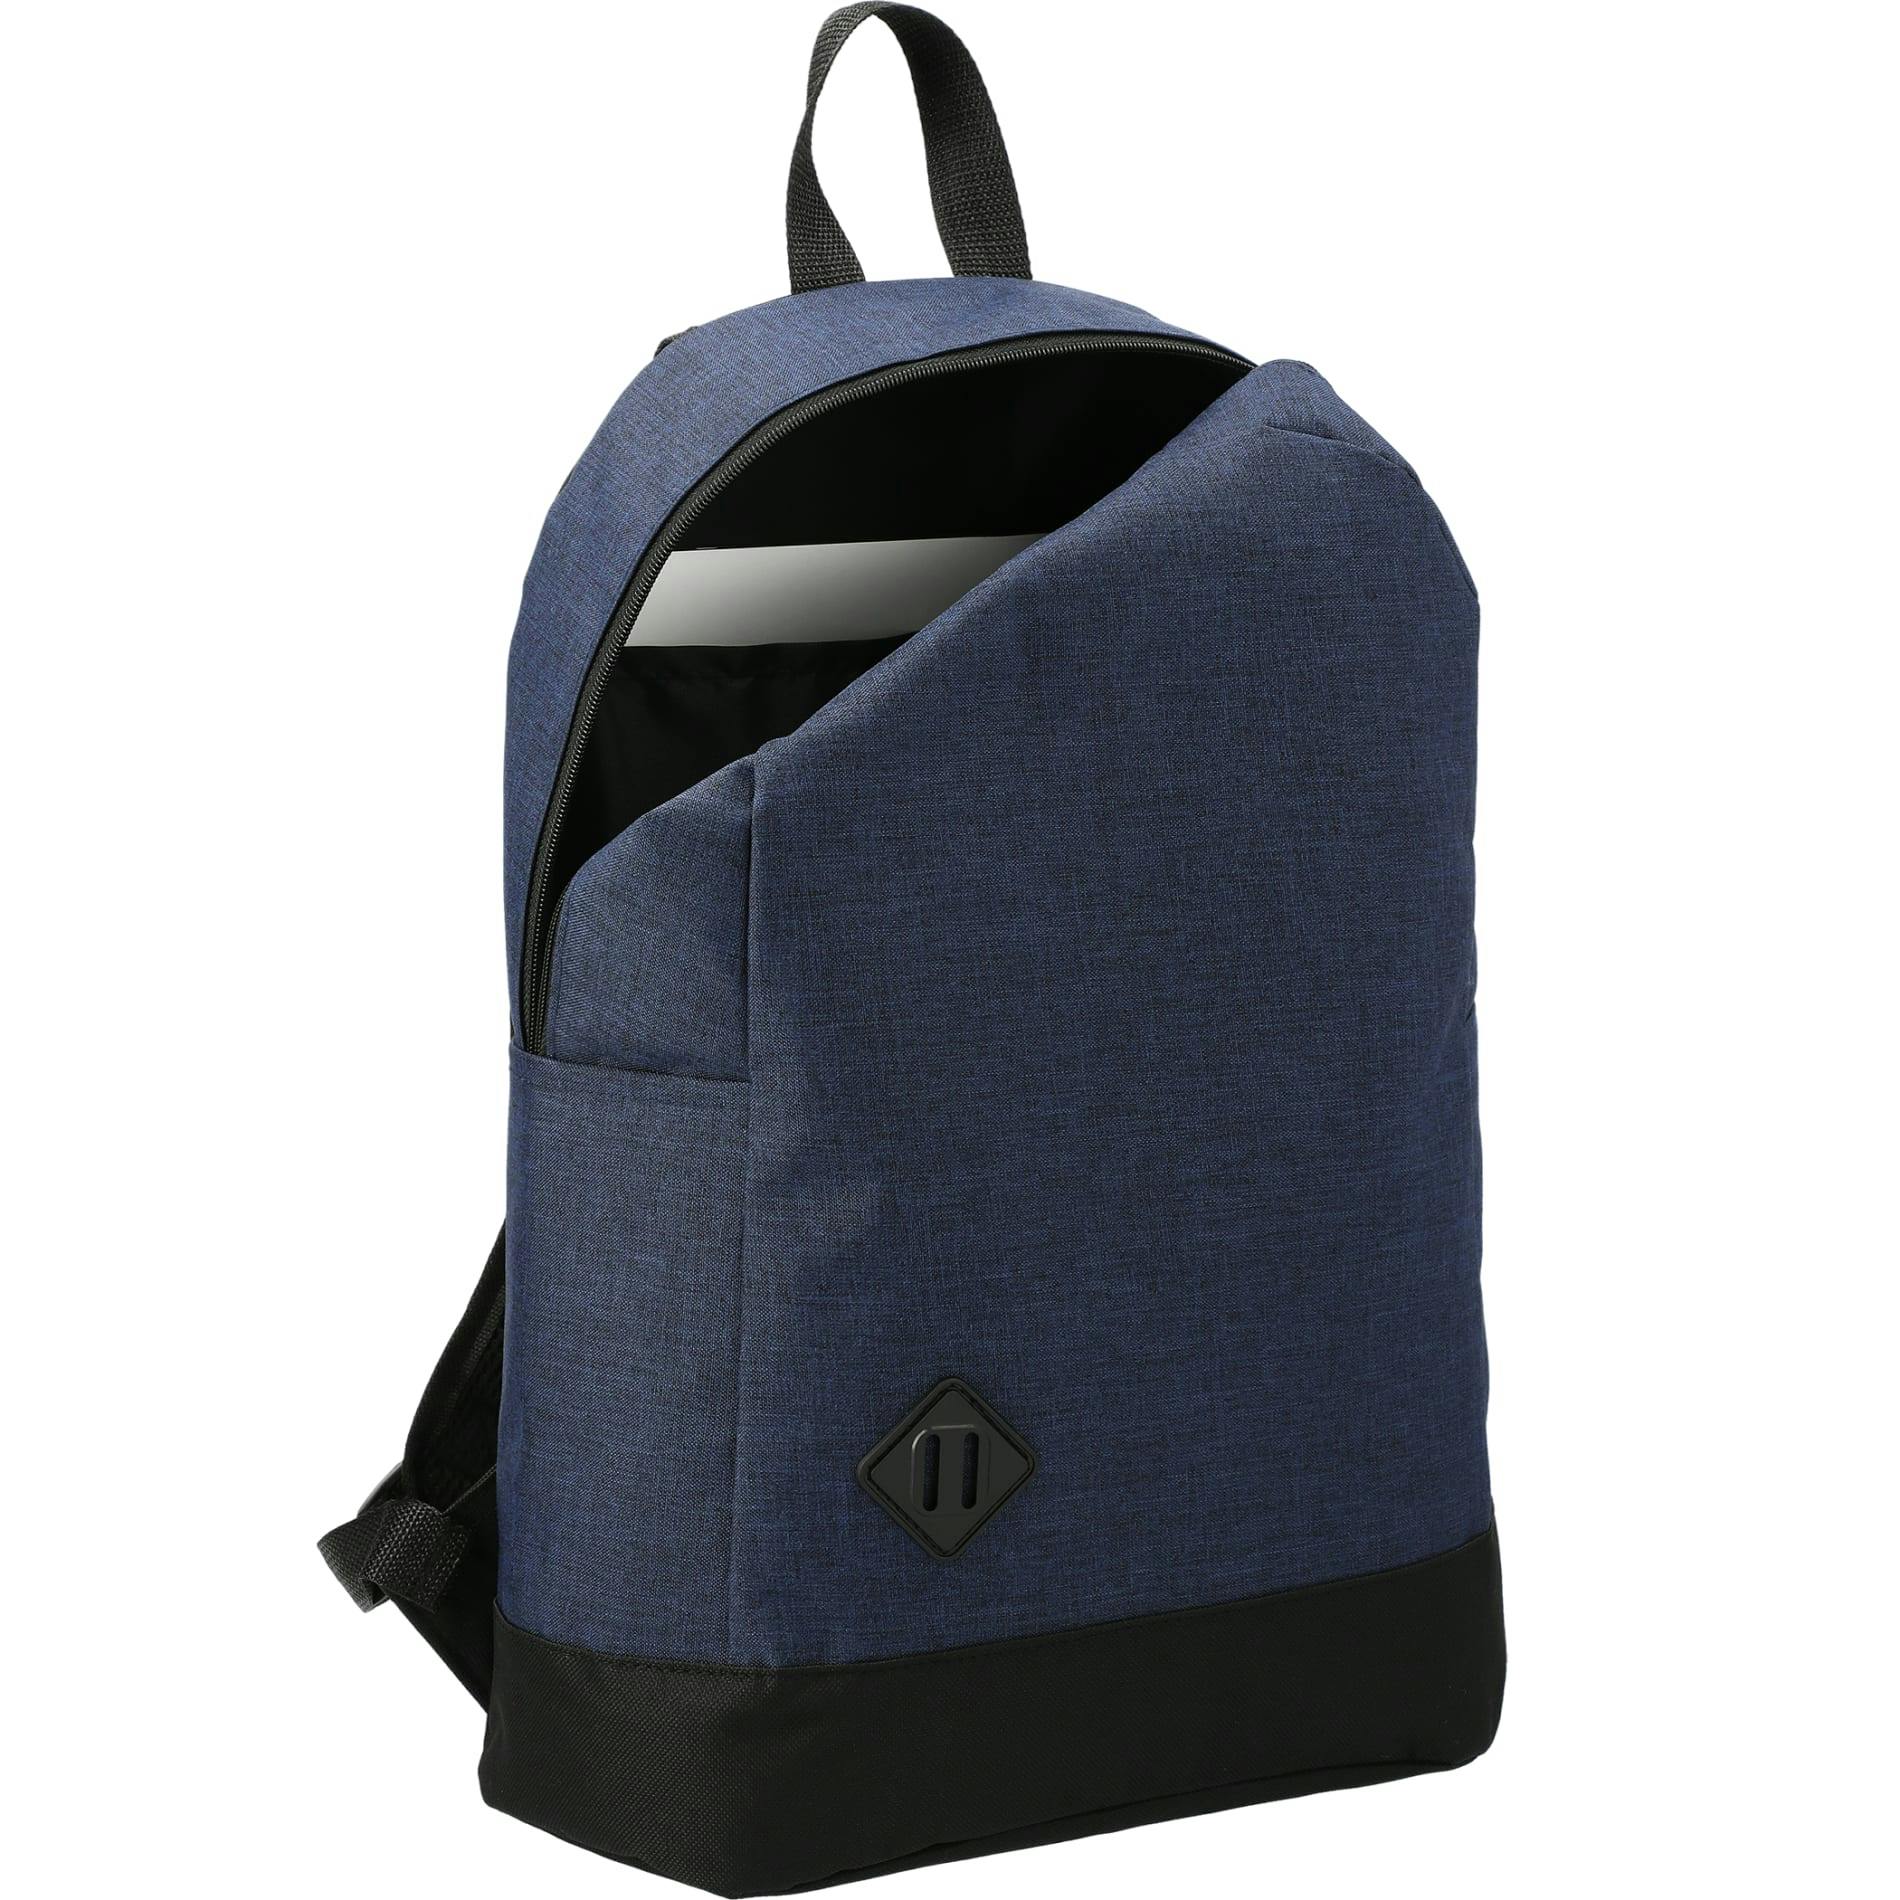 Graphite Dome 15" Computer Backpack - additional Image 1